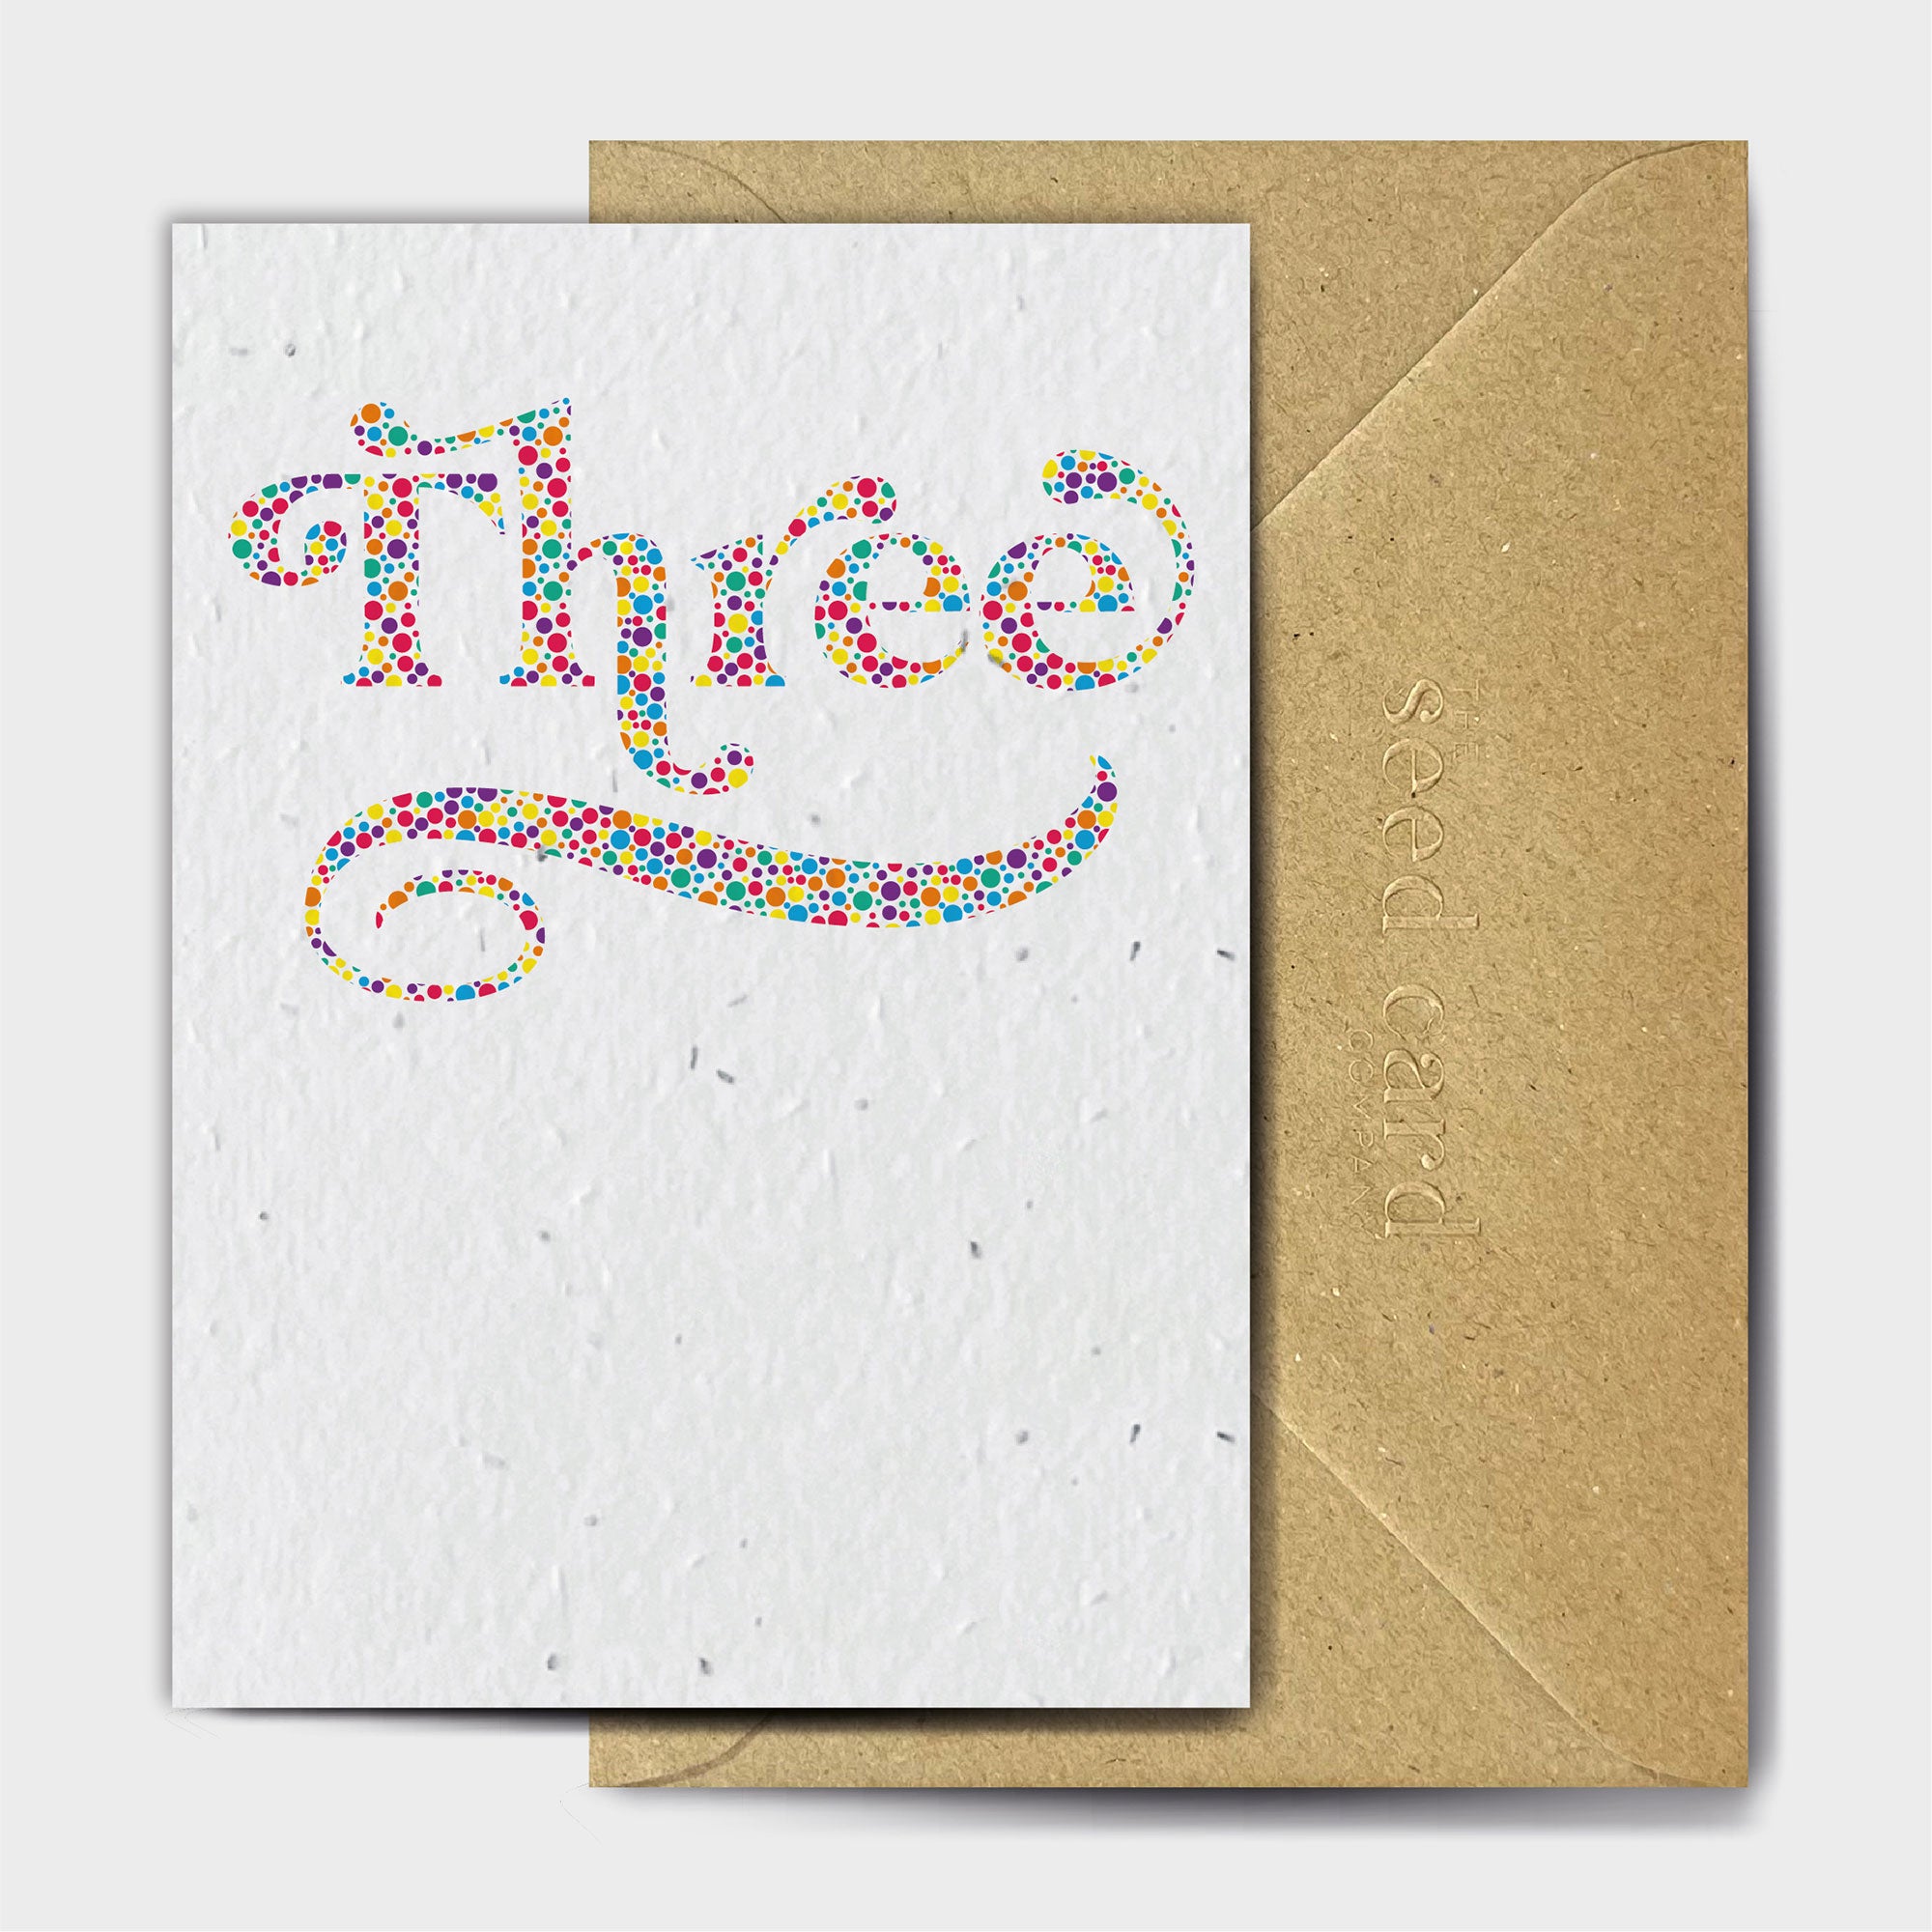 Shop online Dotty Three - 100% biodegradable seed-embedded cards Shop -The Seed Card Company